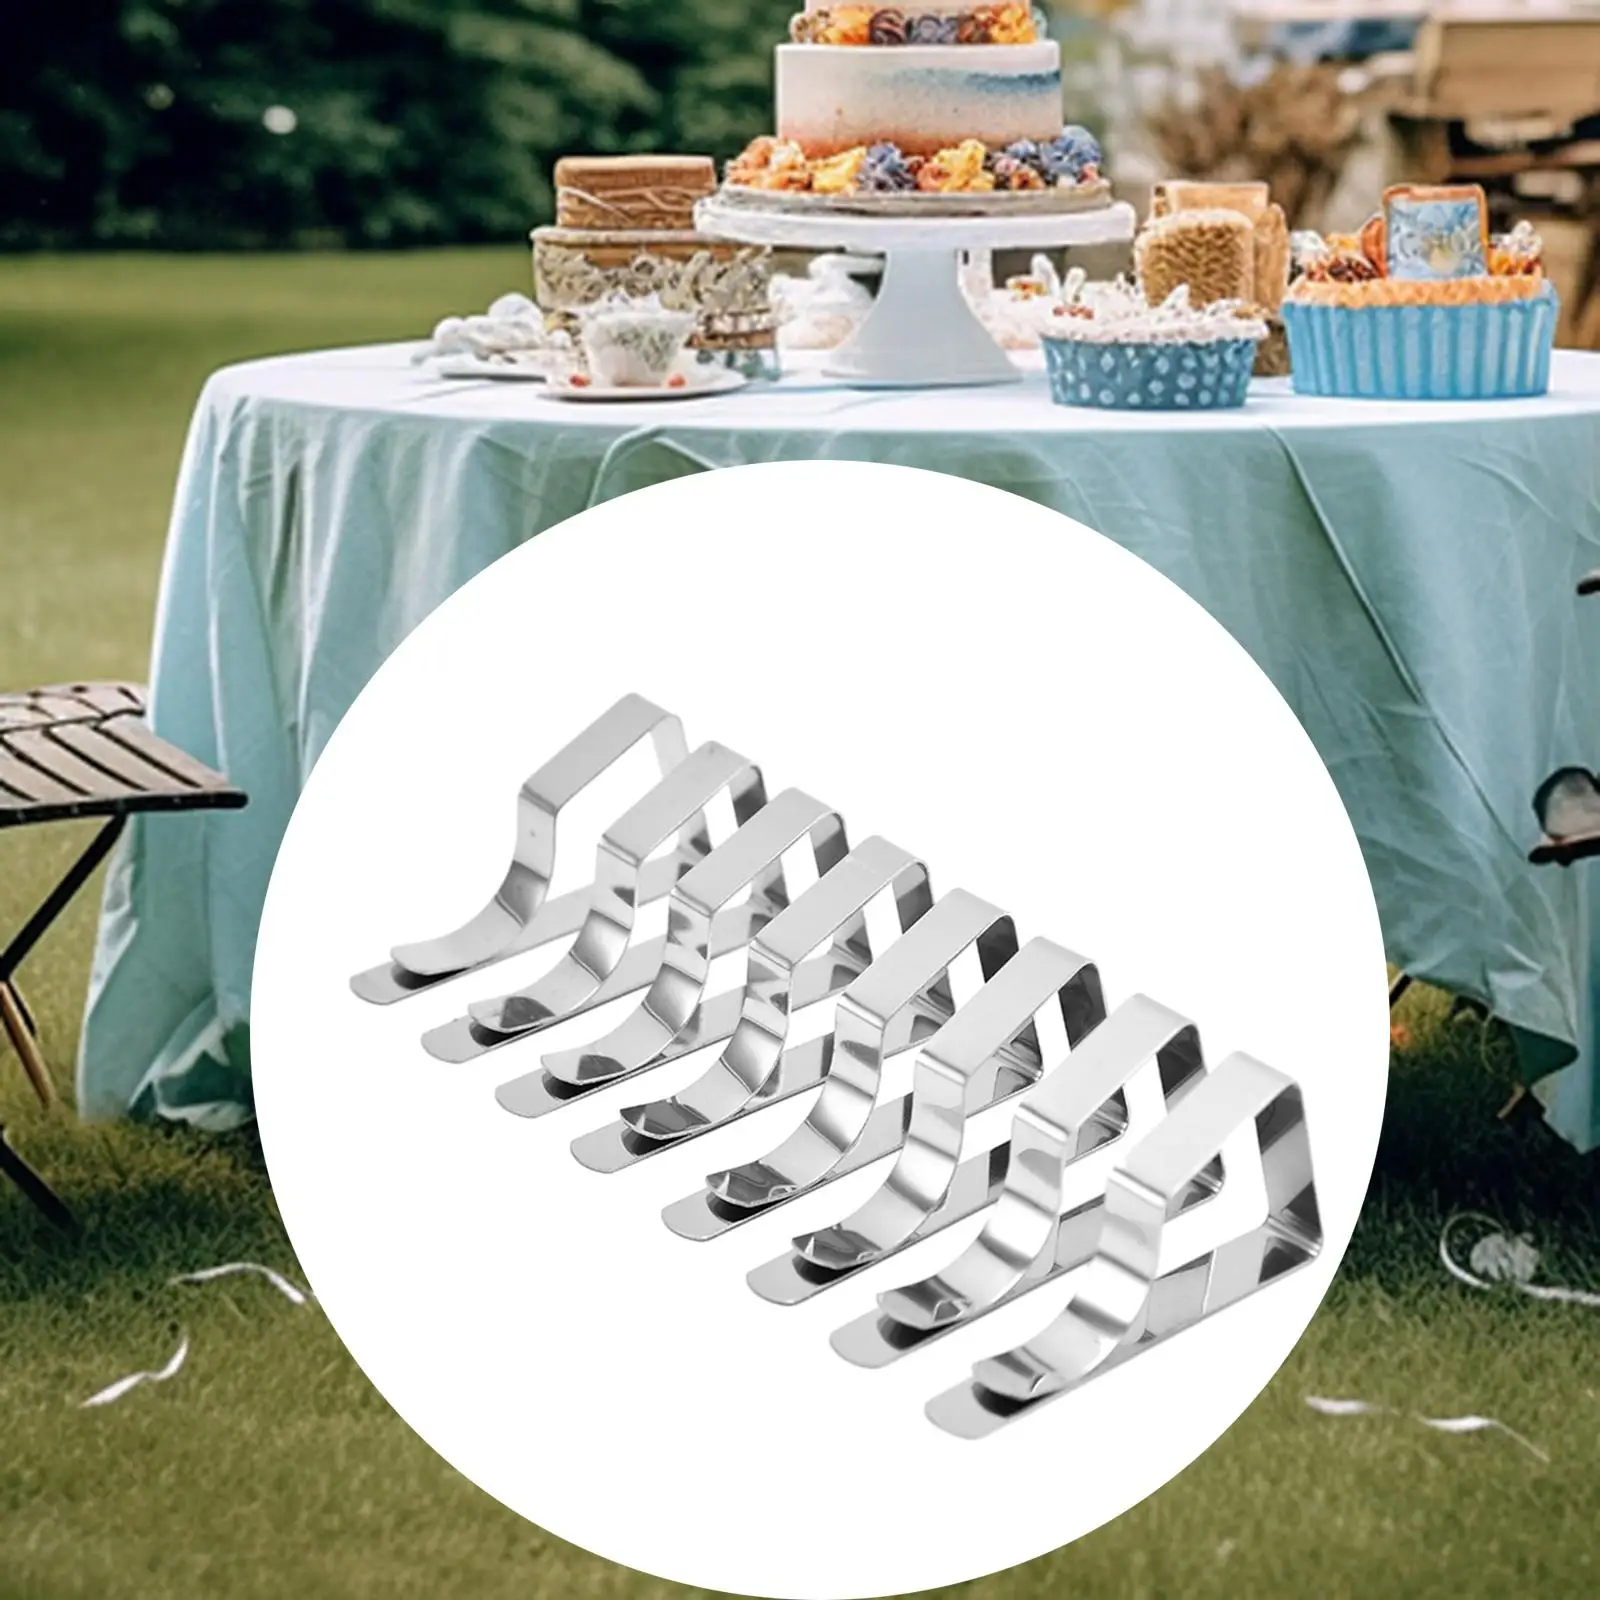 8Pcs Picnic Tablecloth Clips Rustproof Tablecloth Holders Table Cloth Clamps for Indoor Tables Dining Tables Outdoor Tables Home